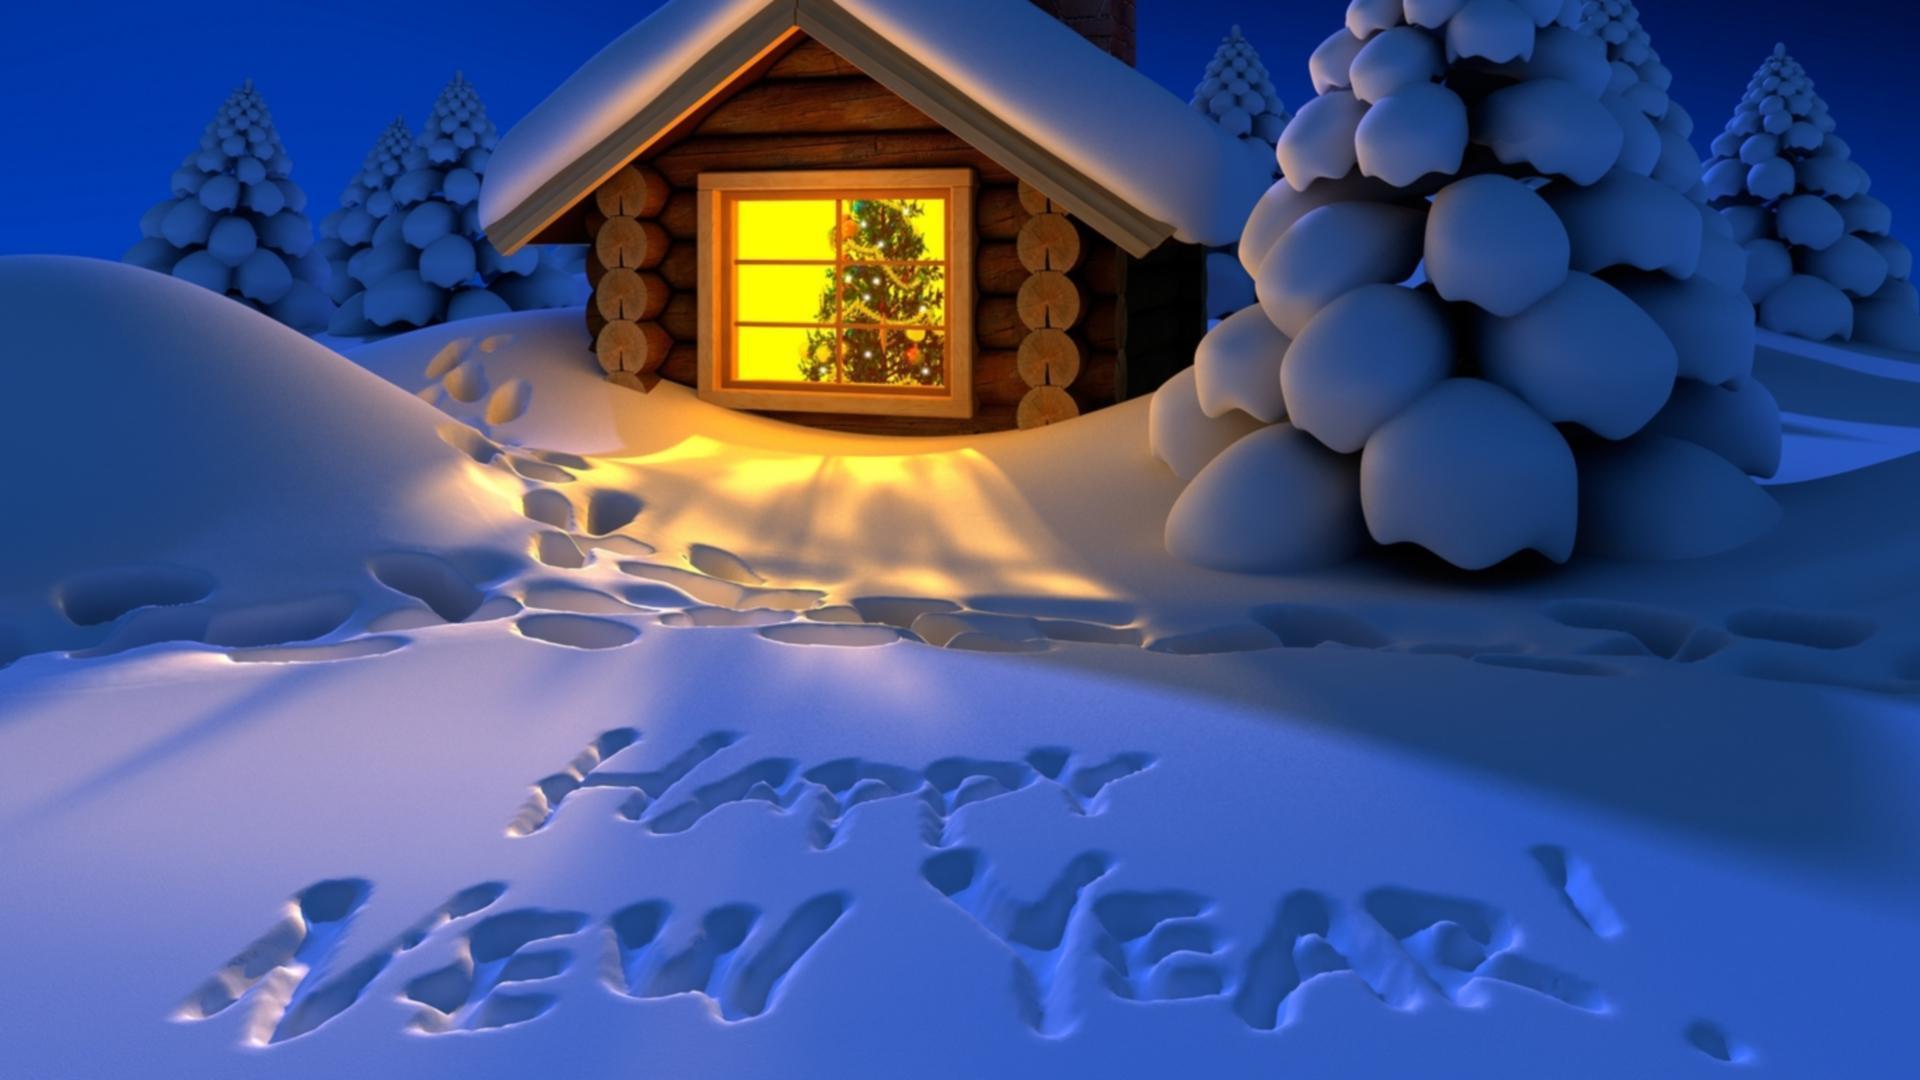 Wallpaper For > New Year Wallpaper 2014 Free Download